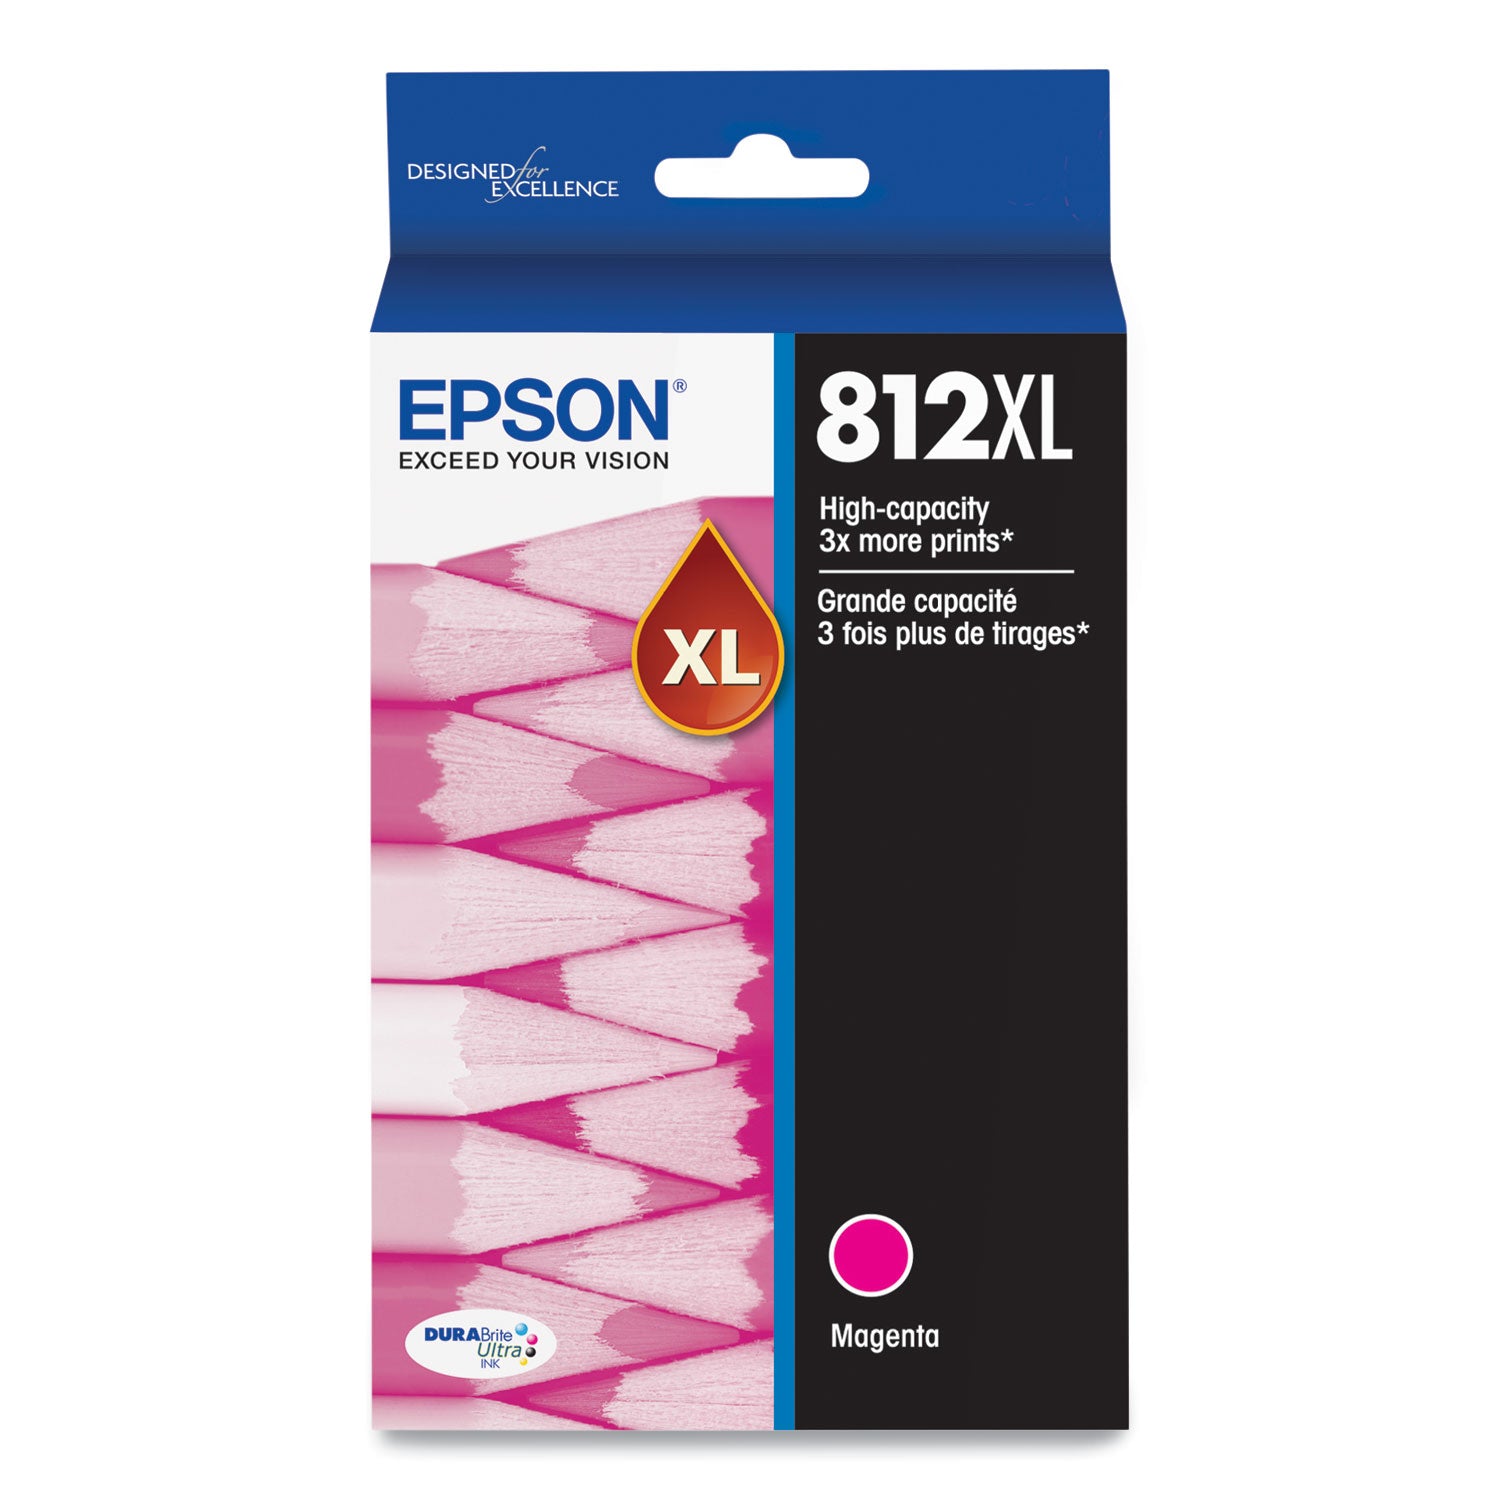 t812xl320-s-t812xl-durabrite-ultra-high-yield-ink-1100-page-yield-magenta_epst812xl320s - 1